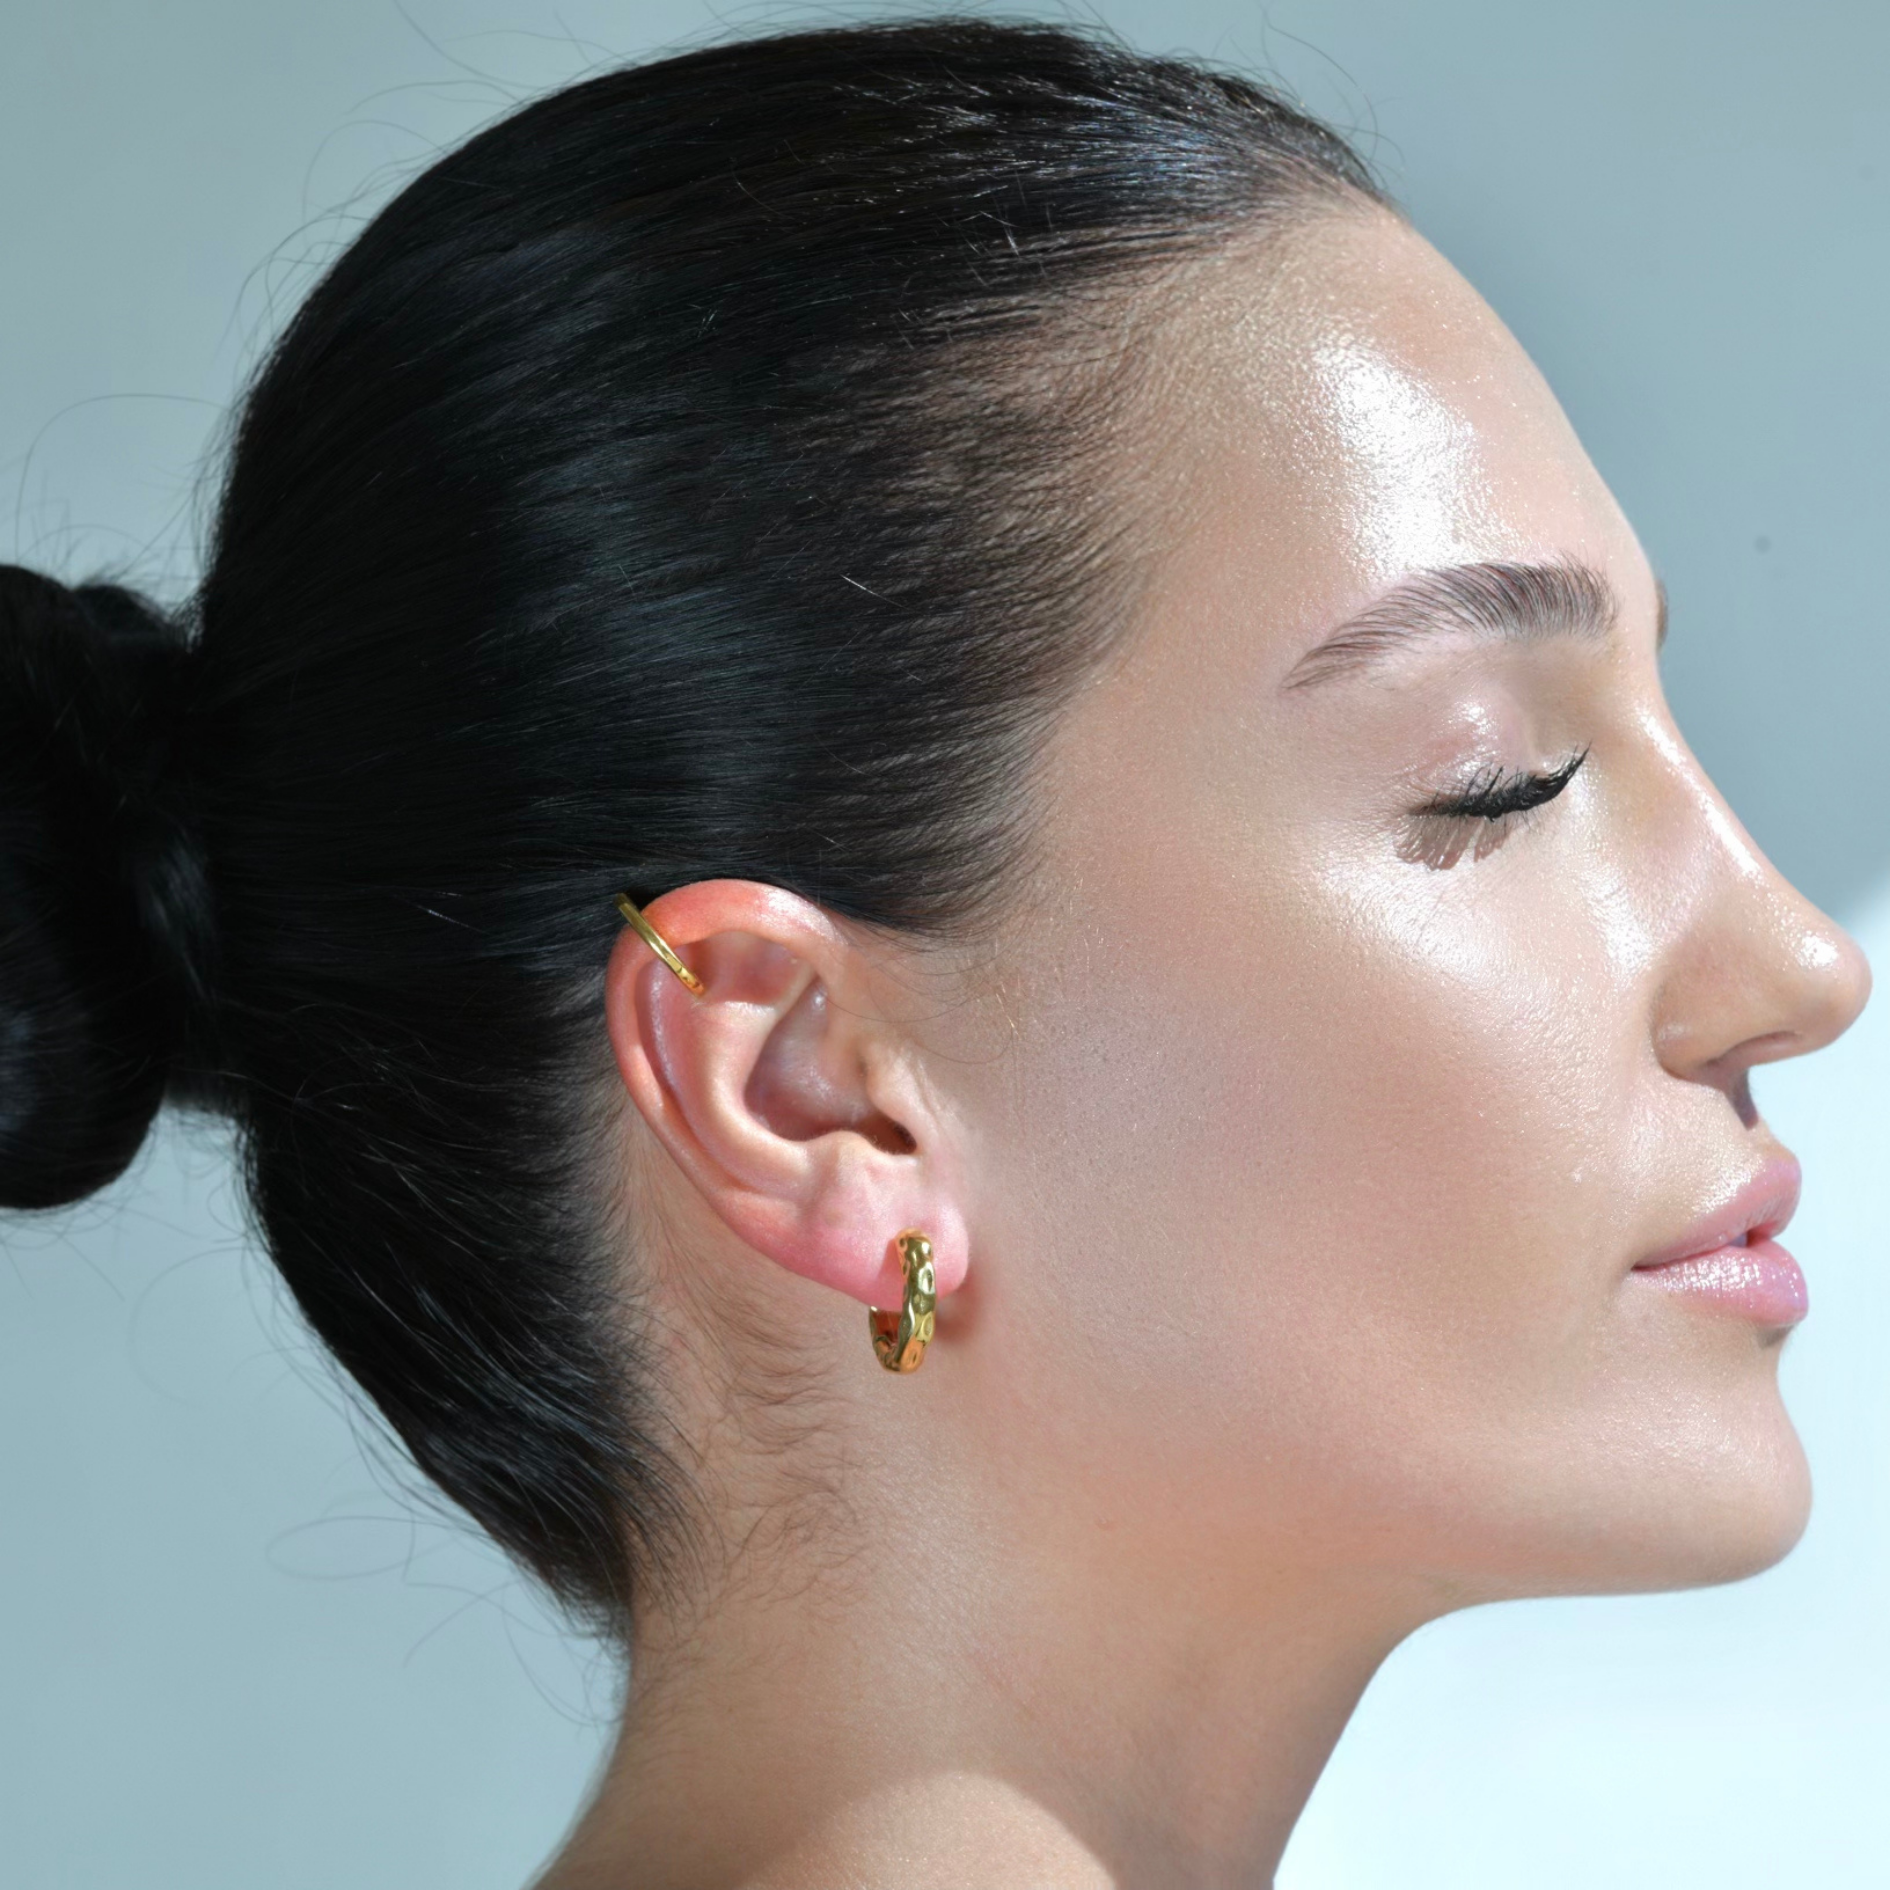 Woman wearing a gold cuff and the Gold Huggies Earrings, Hoop circle earrings with irregilar border texture. The surface texture Resembles waterdrops on the sand